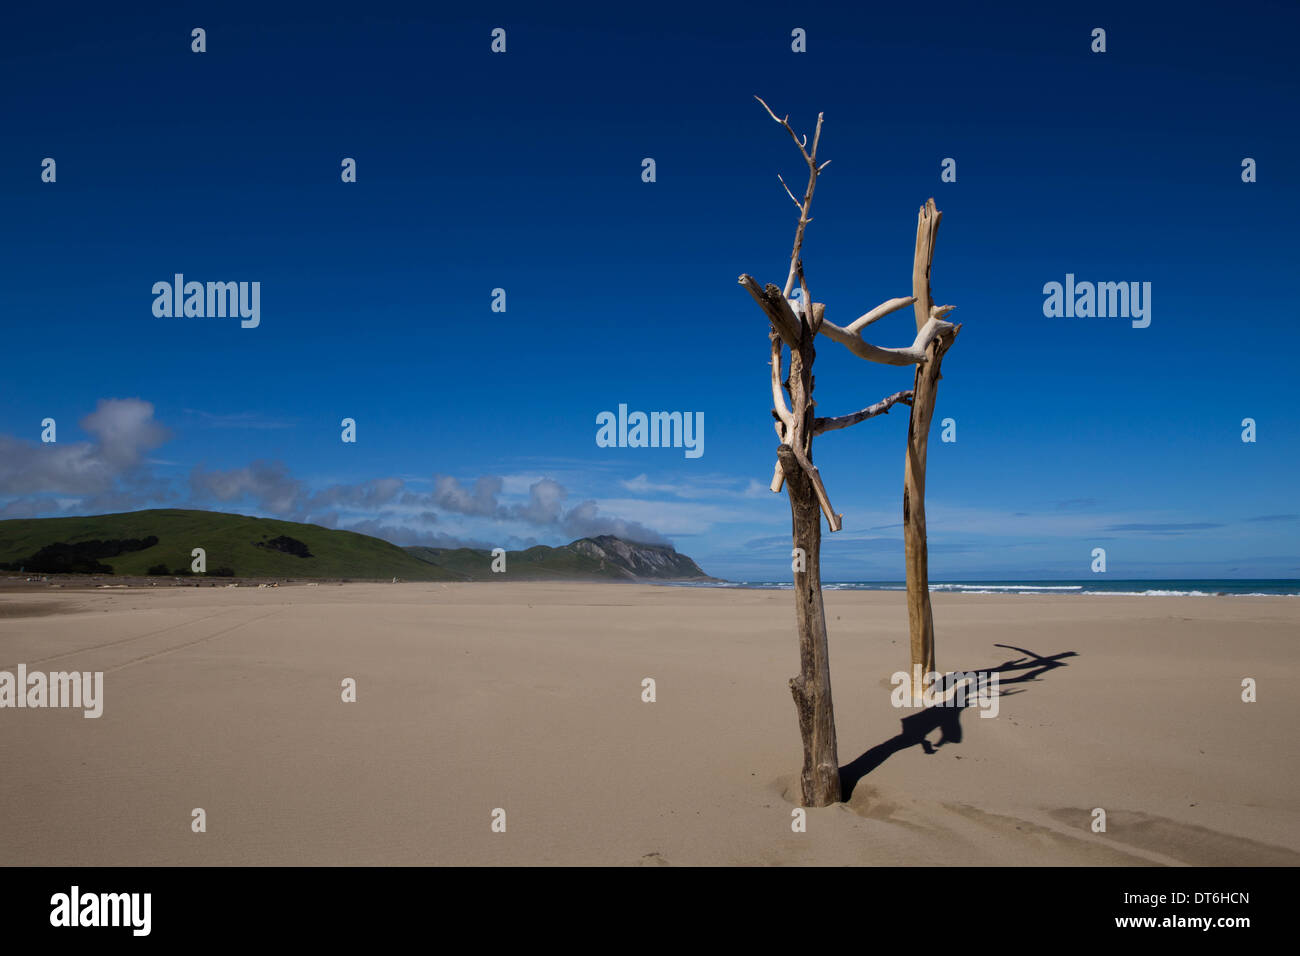 A set of goal posts made from driftwood on an empty beach. Stock Photo